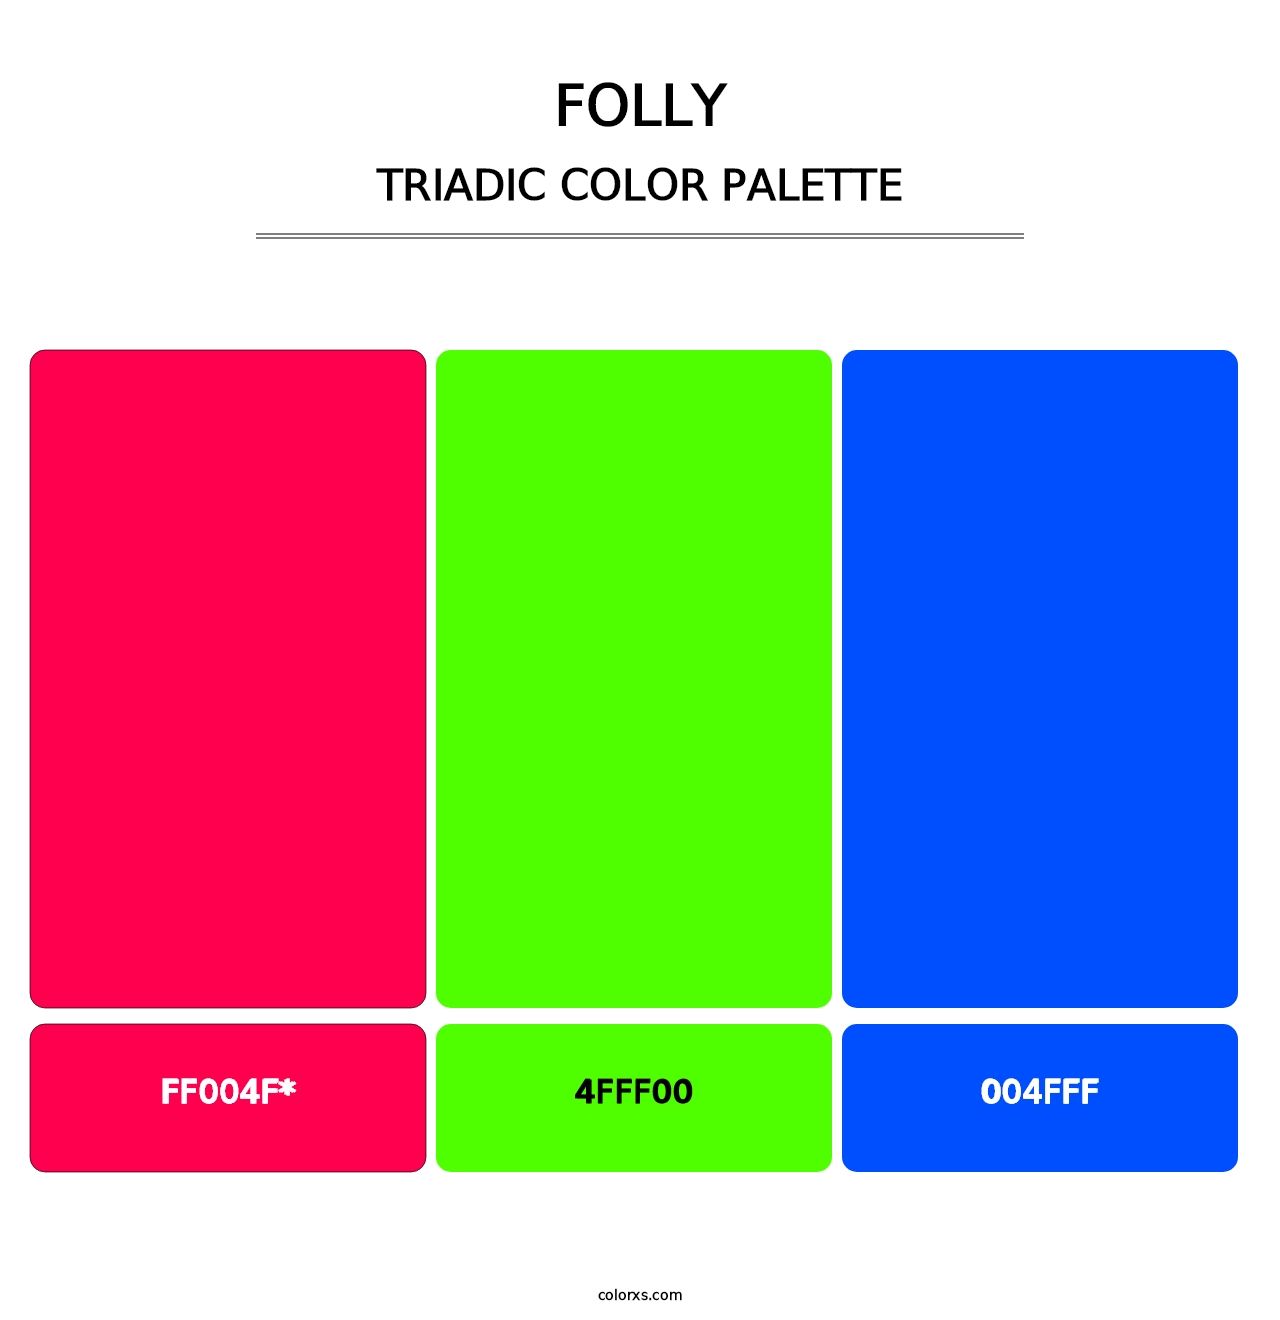 Folly - Triadic Color Palette